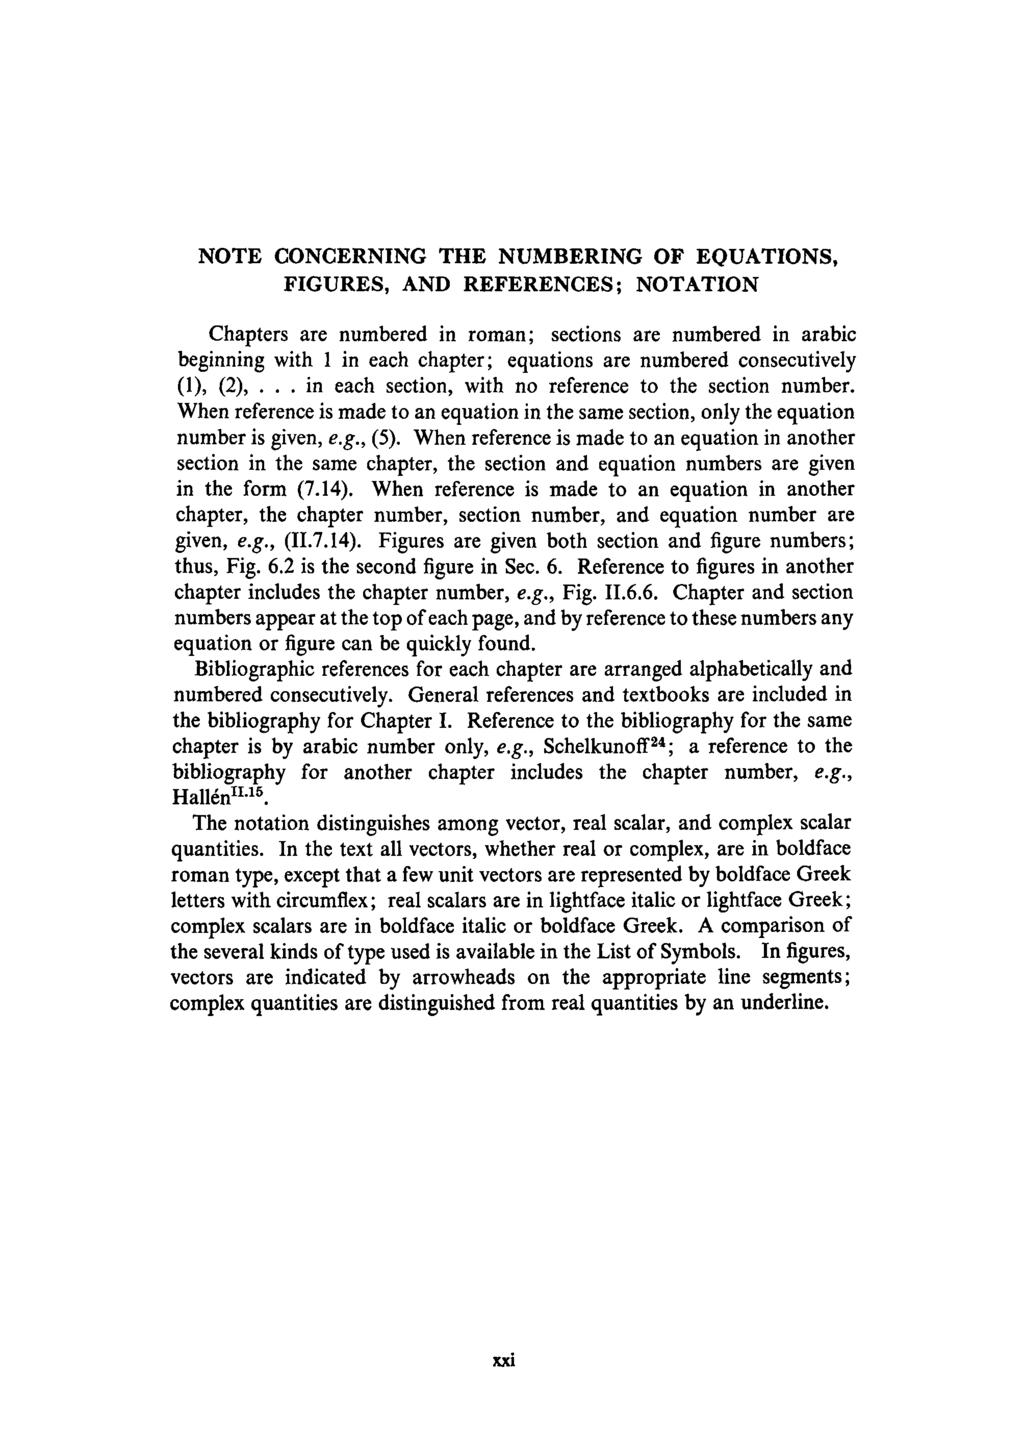 NOTE CONCERNING THE NUMBERING OF EQUATIONS, FIGURES, AND REFERENCES; NOTATION Chapters are numbered in roman; sections are numbered in arabic beginning with 1 in each chapter; equations are numbered